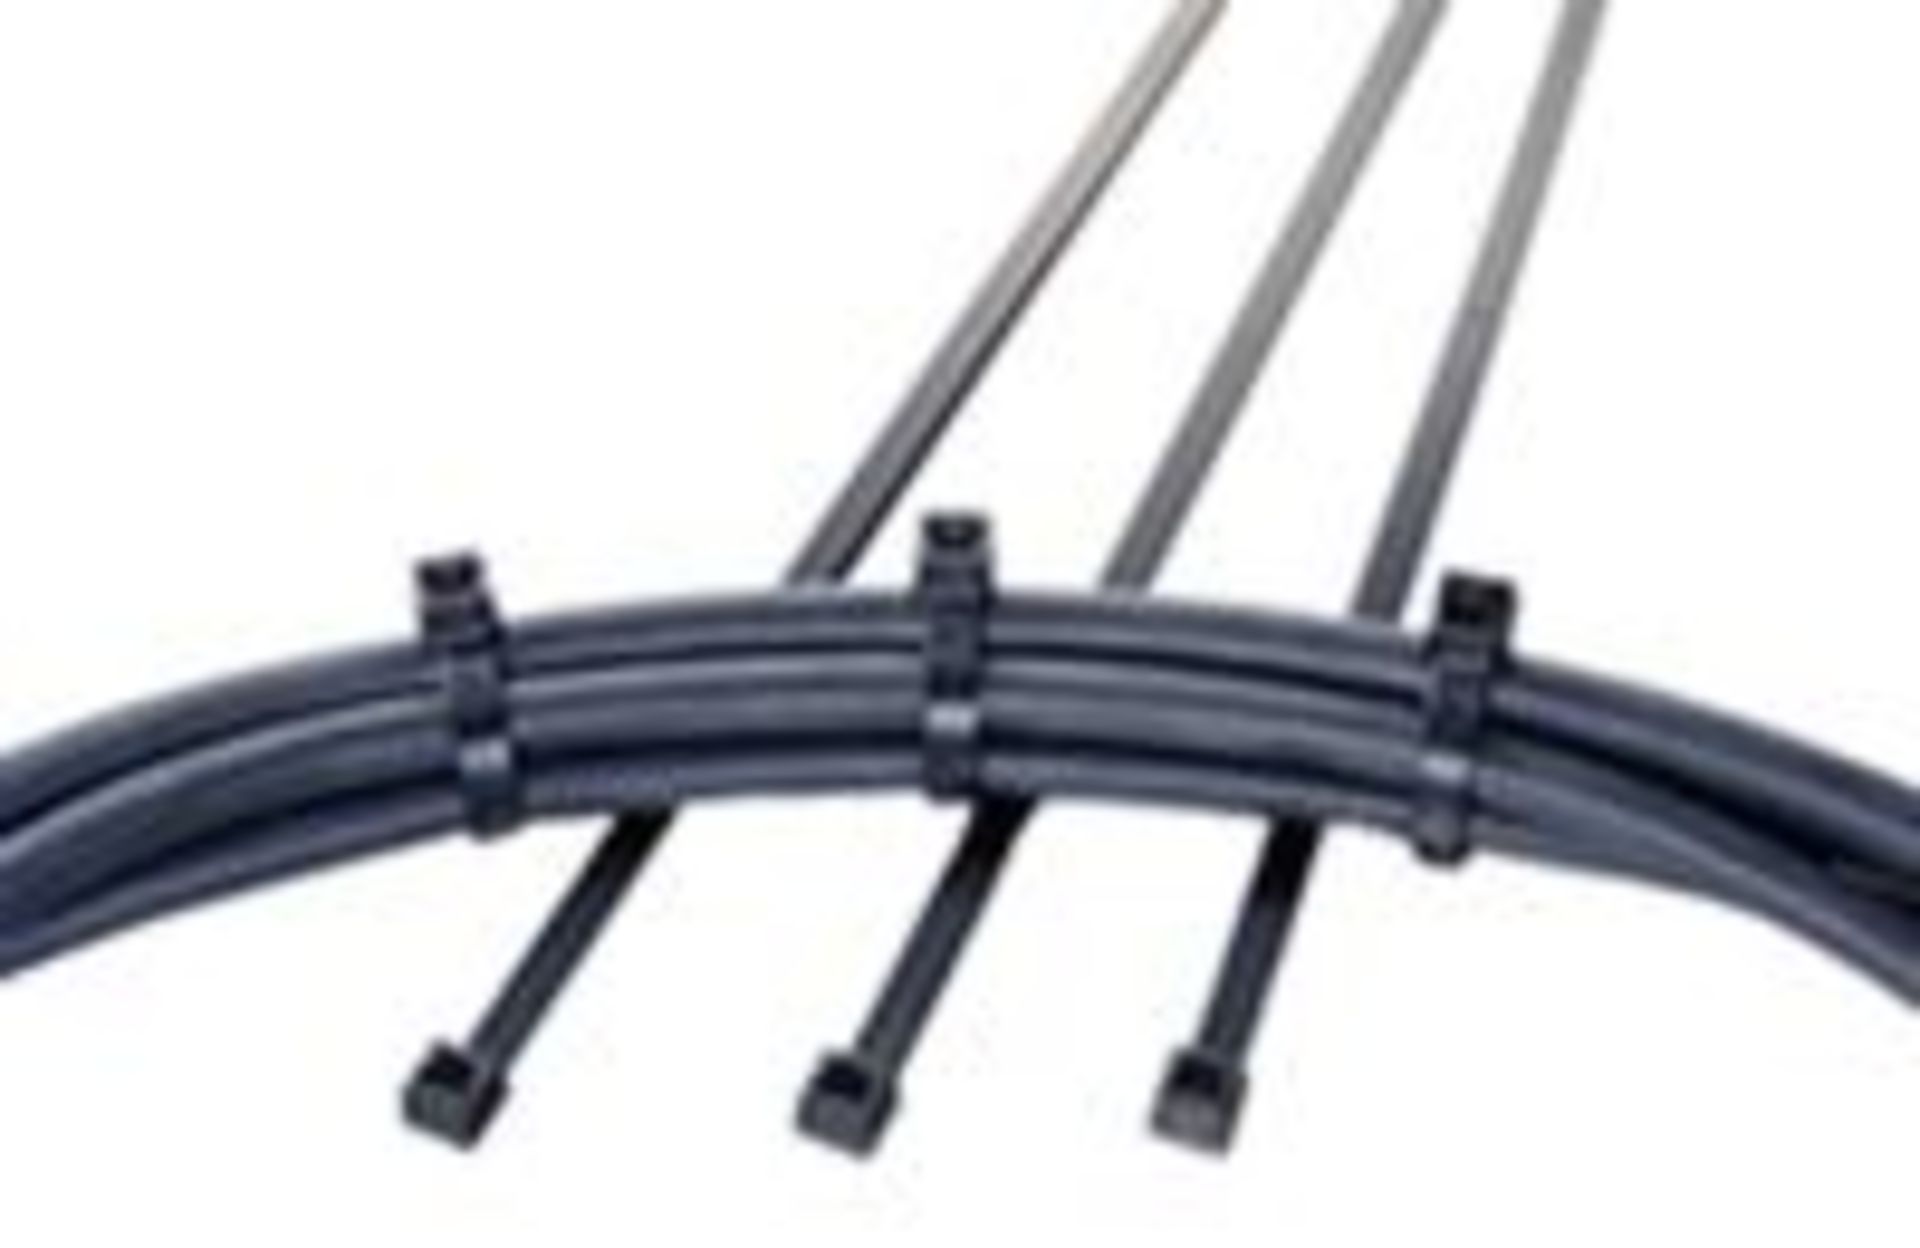 1,000 x Hellermann Tyton Black Nylon Non Releasable Cable Ties - 270mm x 4.6mm - LK Series - CL011 - - Image 2 of 4